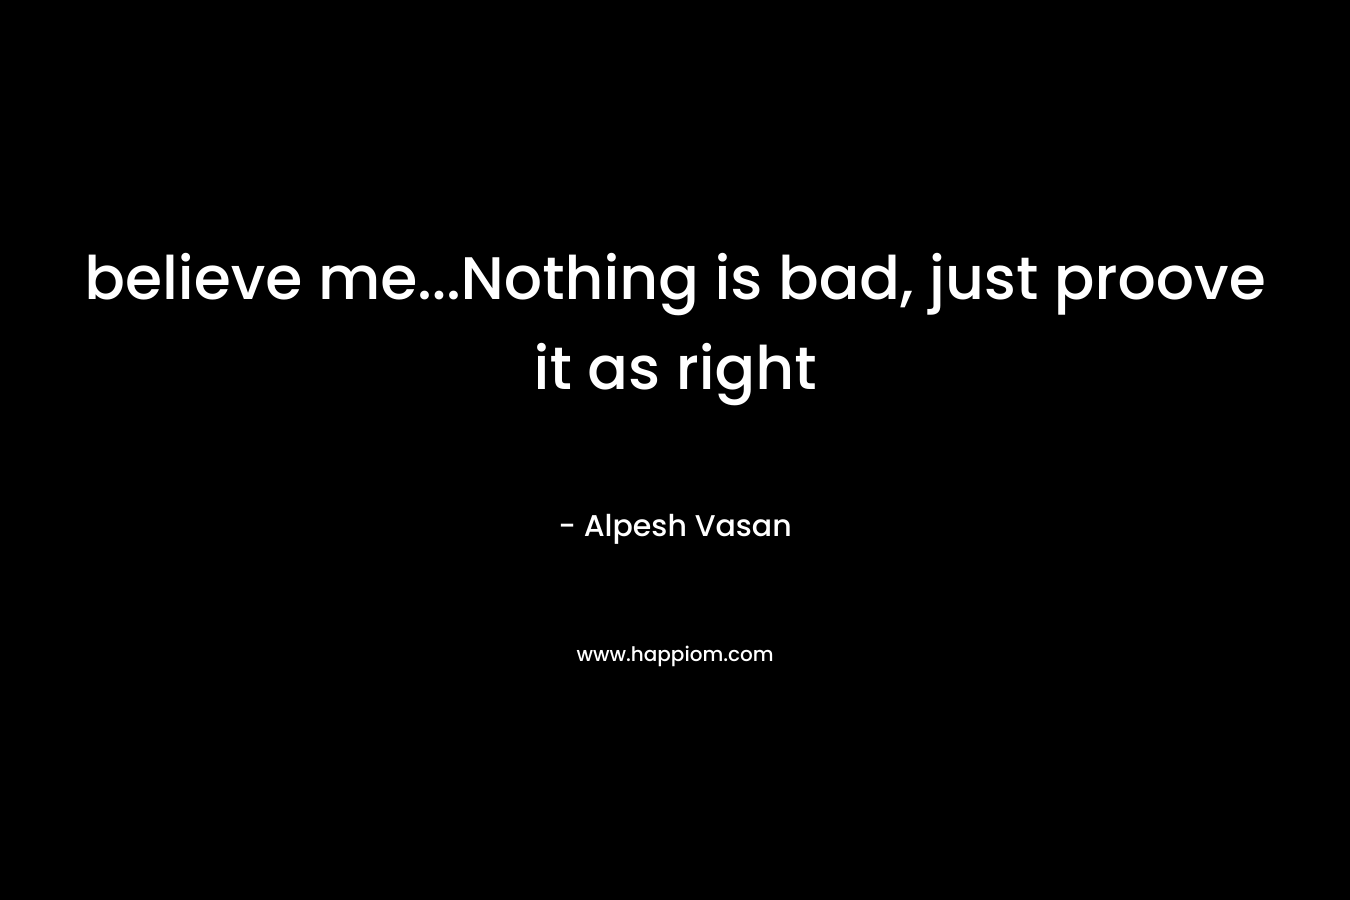 believe me...Nothing is bad, just proove it as right